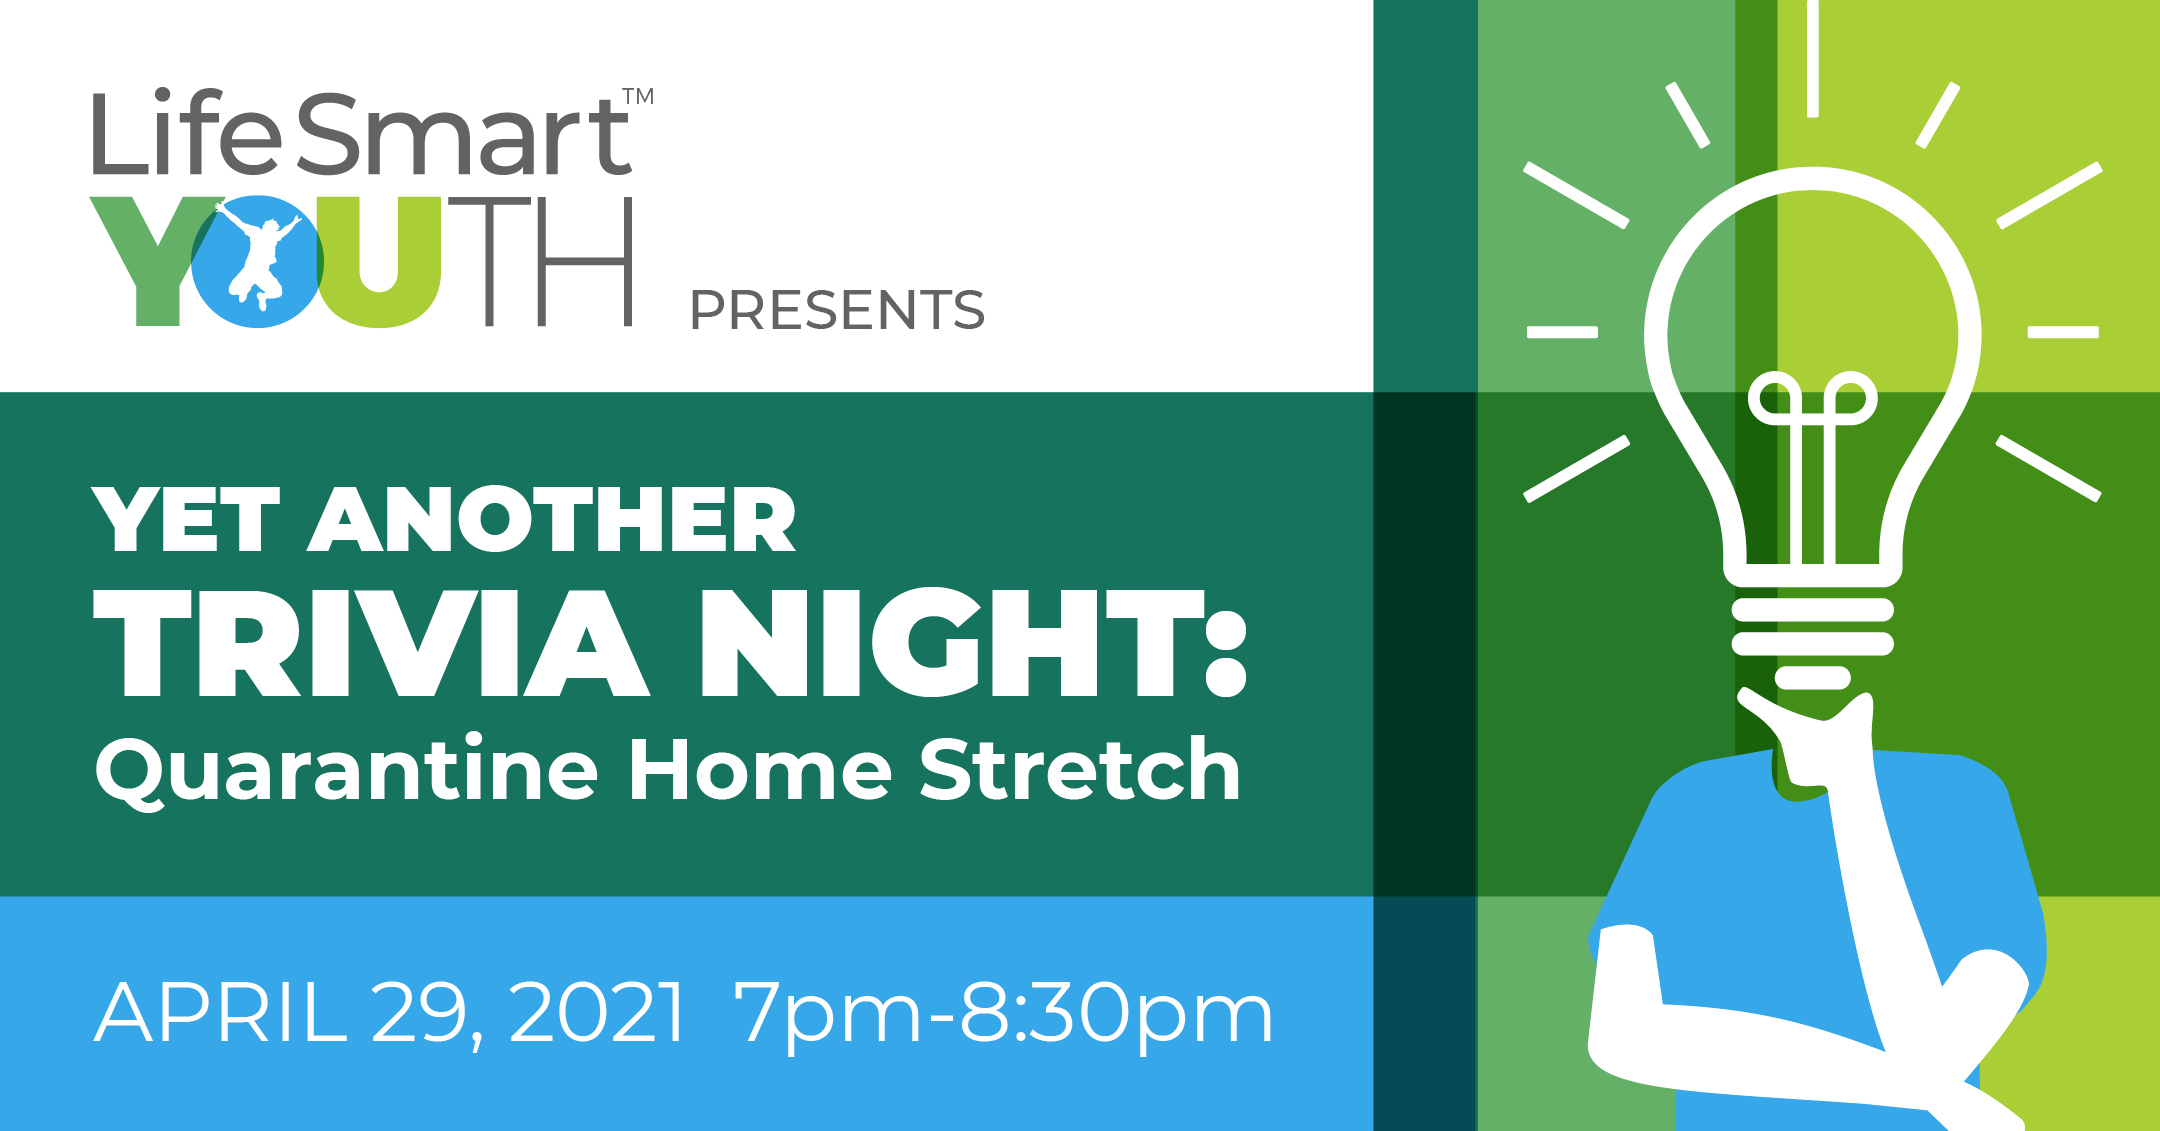 LifeSmart Youth Presents Yet Another Trivia Night: Quarantine Home Stretch